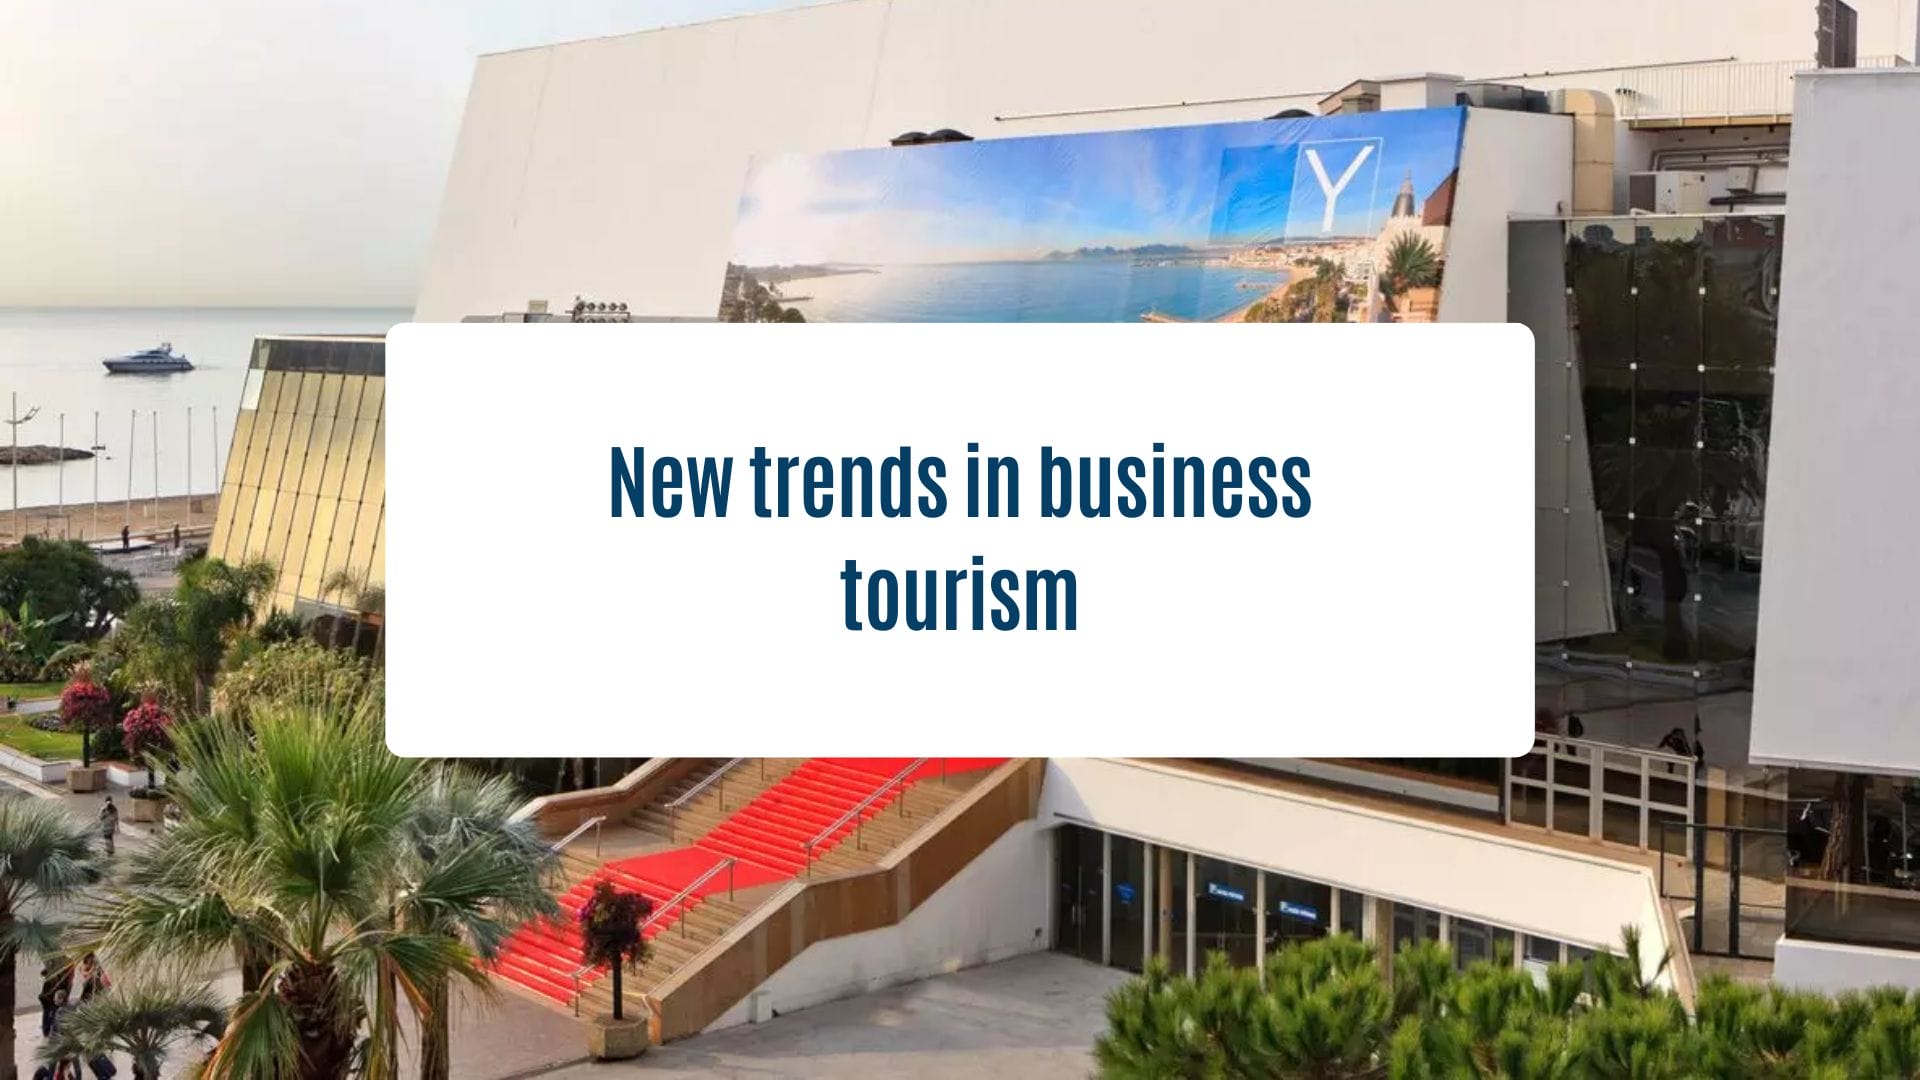 News Olam Properties - New trends in business tourism